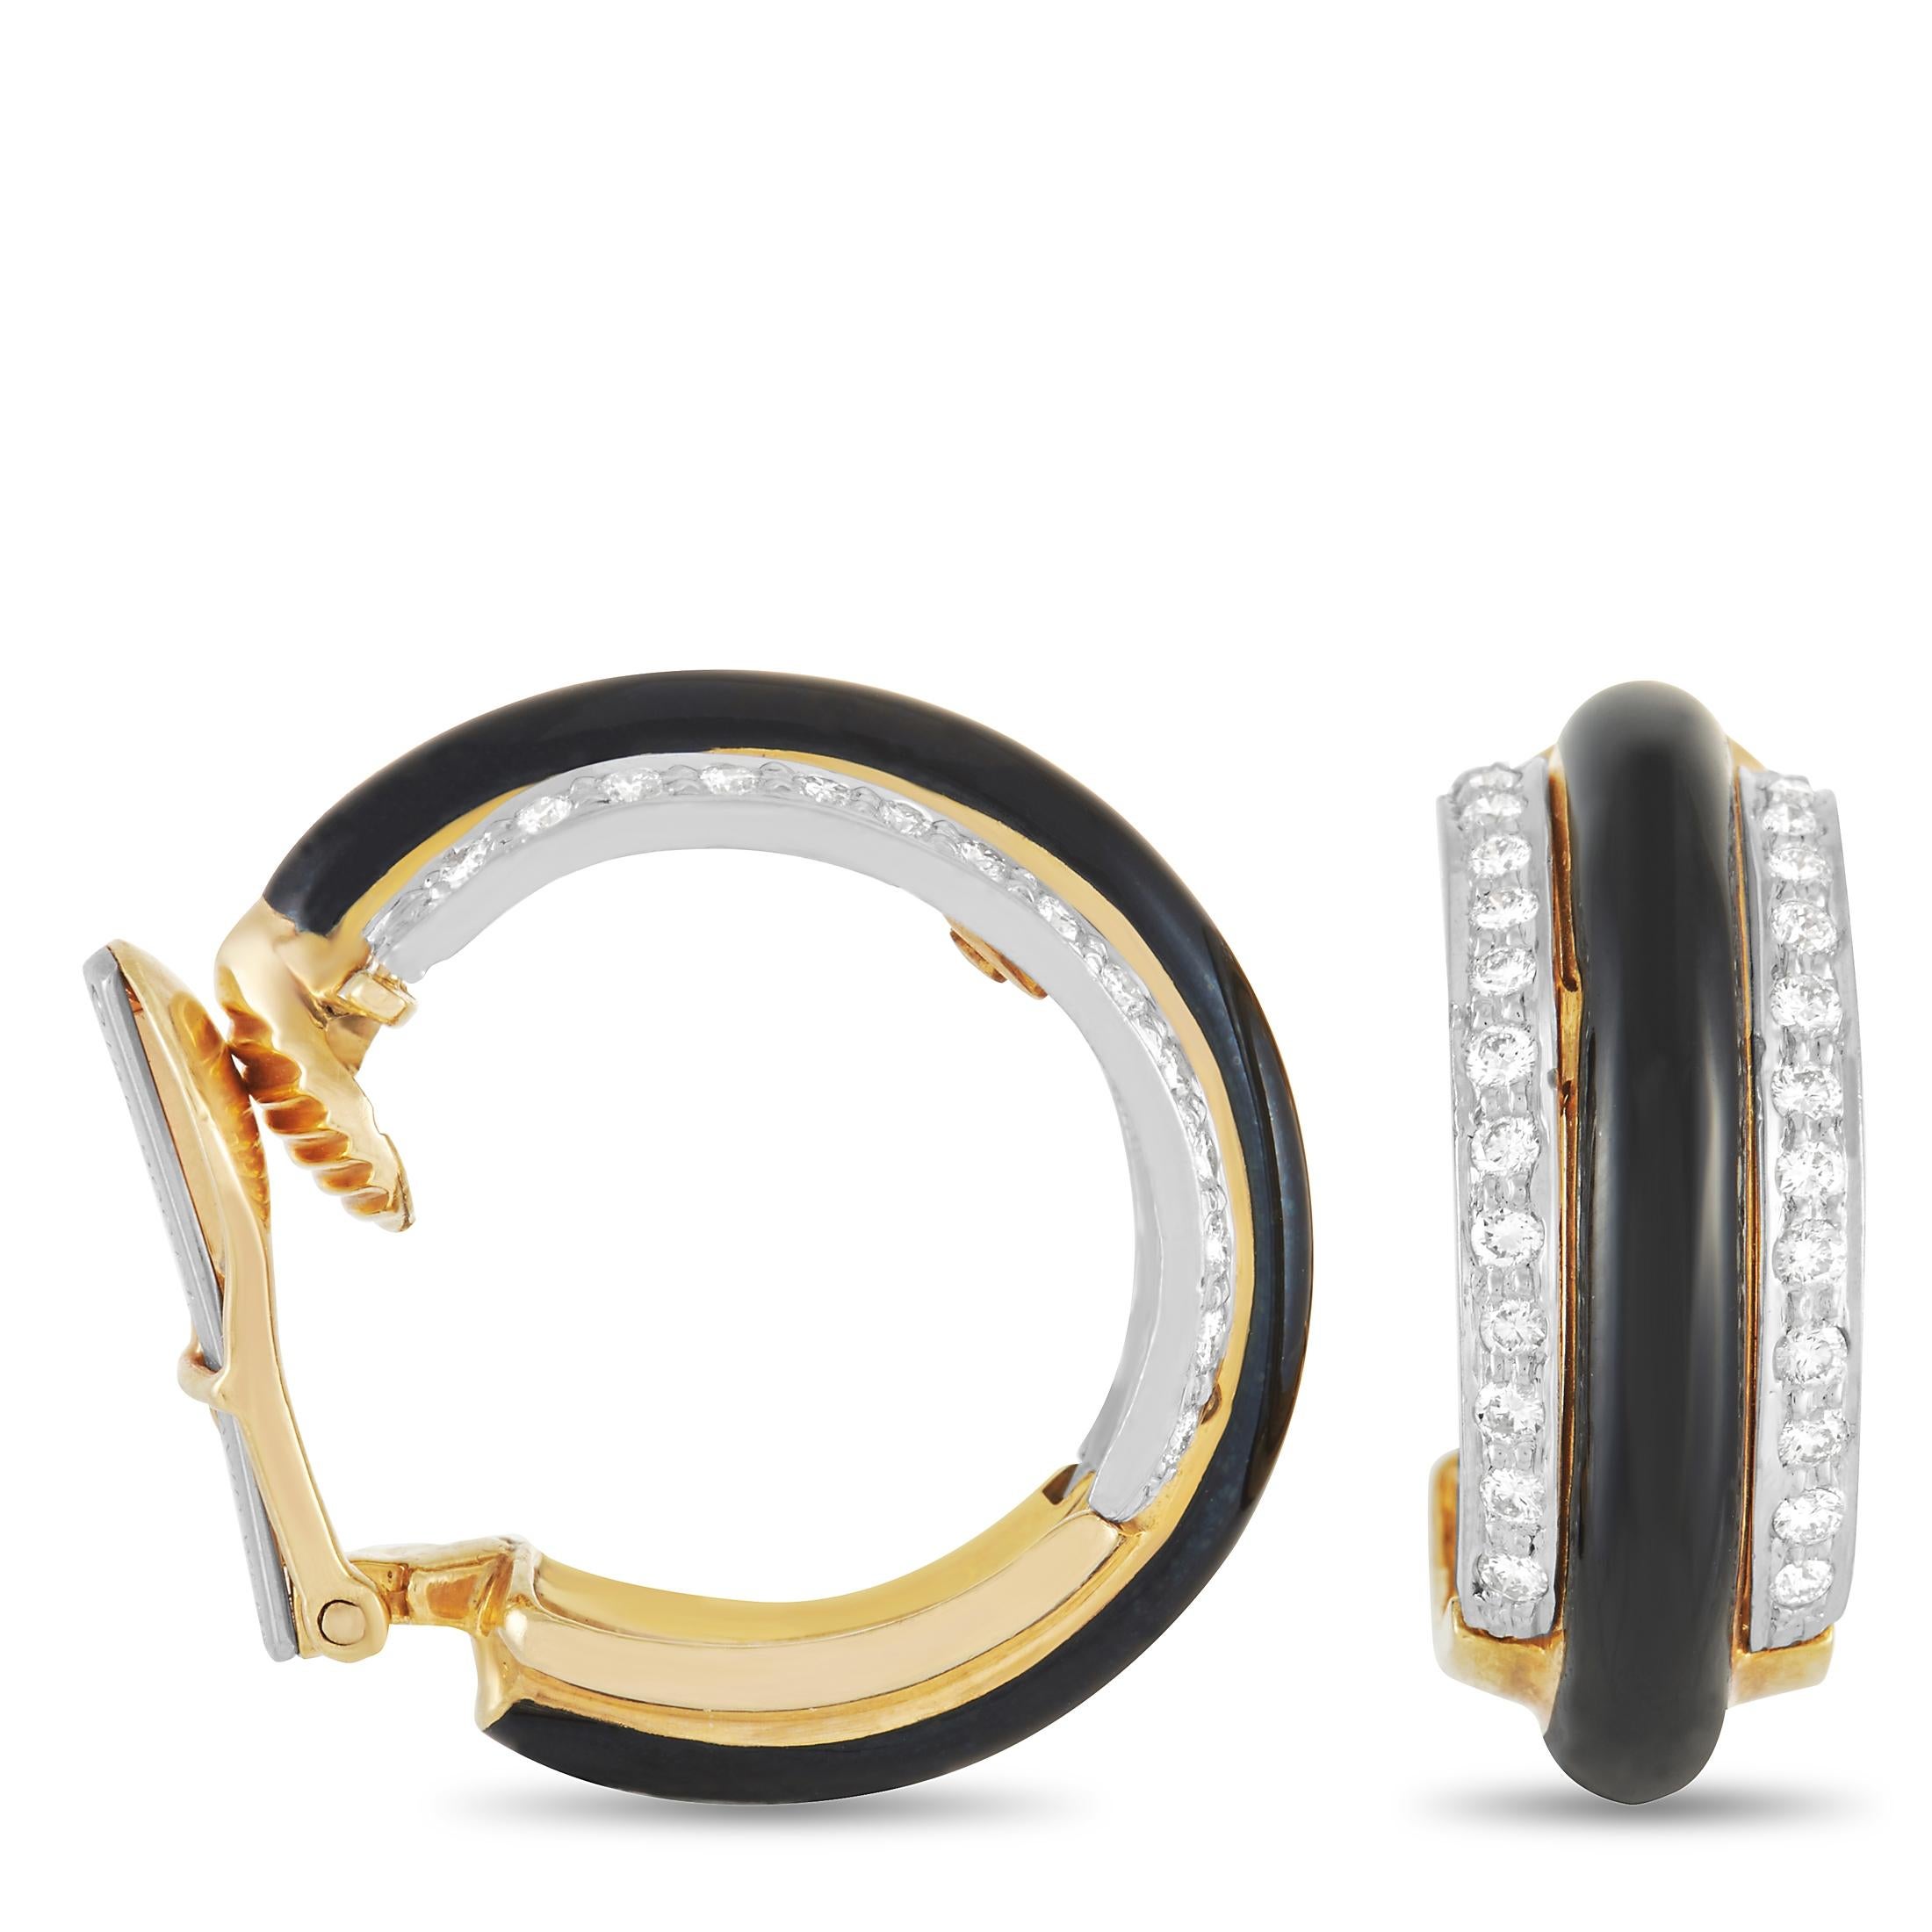 These unique David Webb 18K Yellow Gold 1.26 ct Diamond Onyx Earrings are made with 18K yellow gold and are set with two rows of 1.26 carats of round diamonds around the outside of both hoops. Between the rows of diamonds, there is a band of onyx